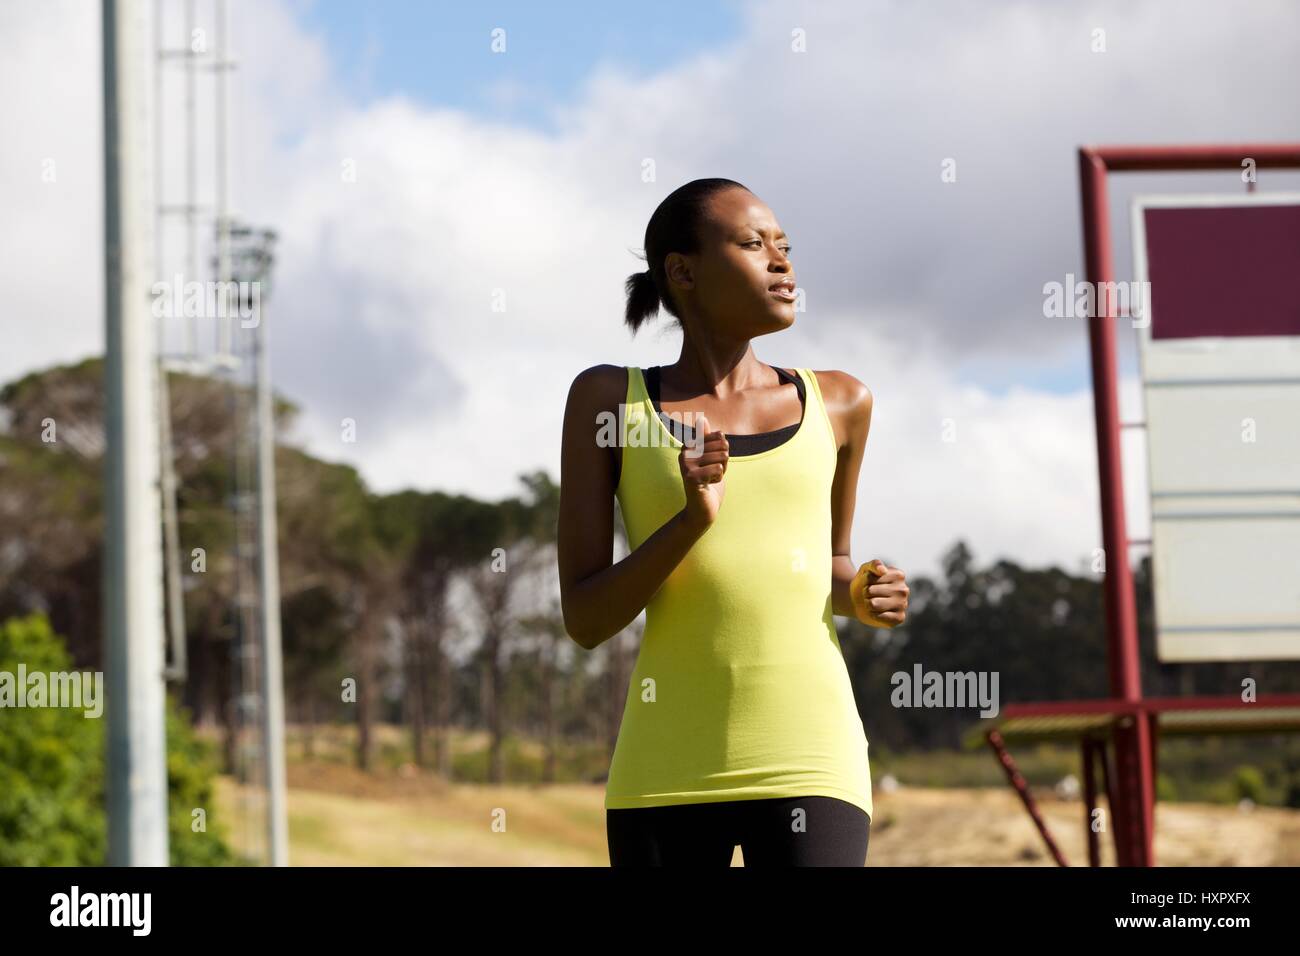 Portrait of a fit young woman running outside Stock Photo